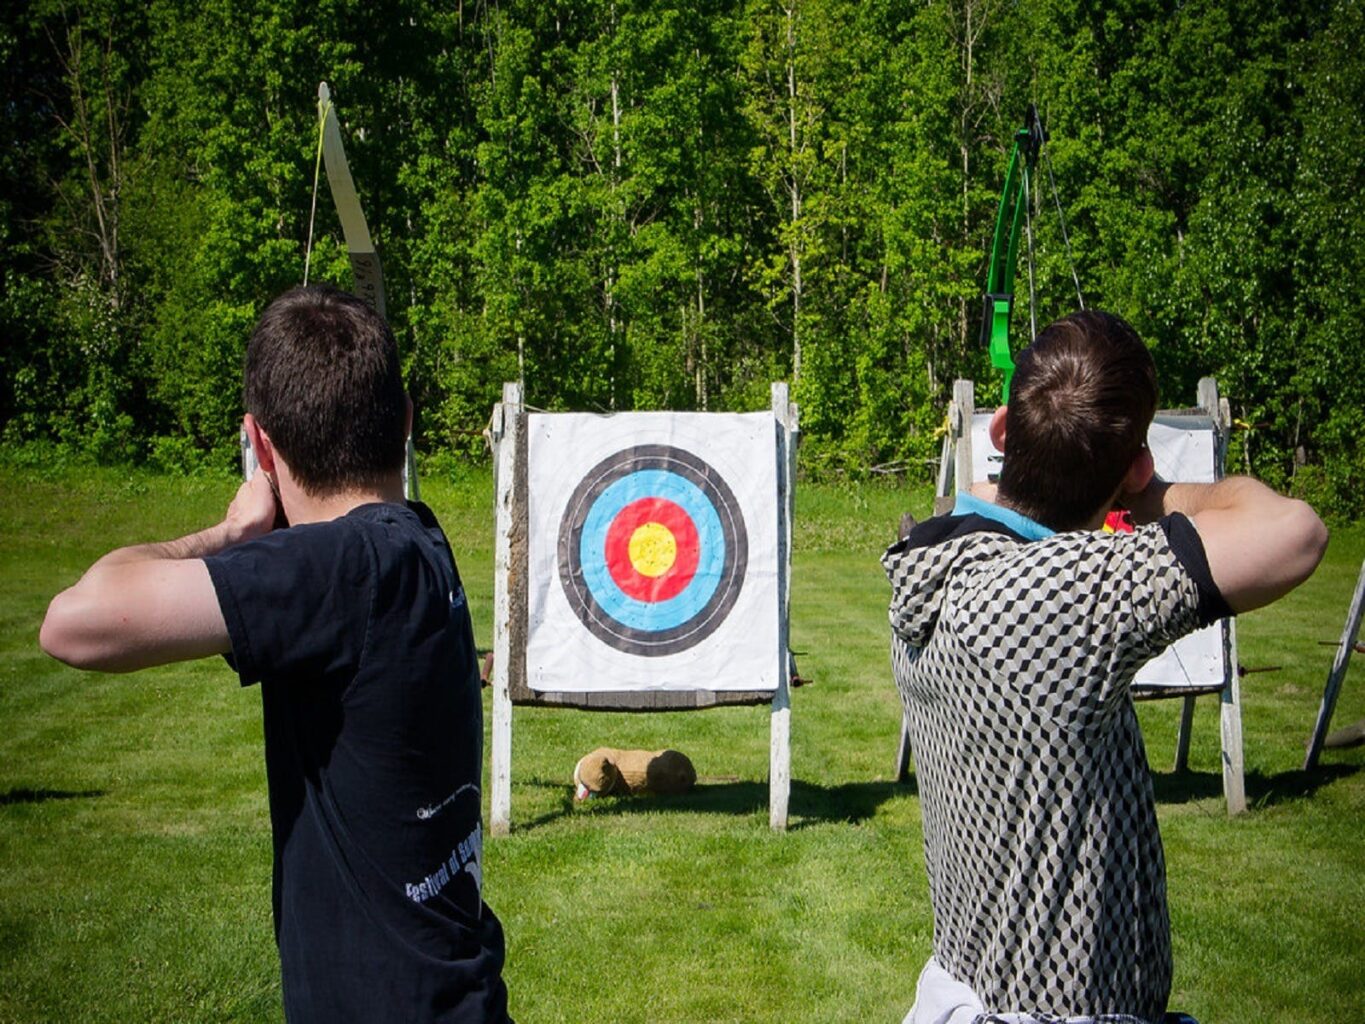 Hitting target with arrows